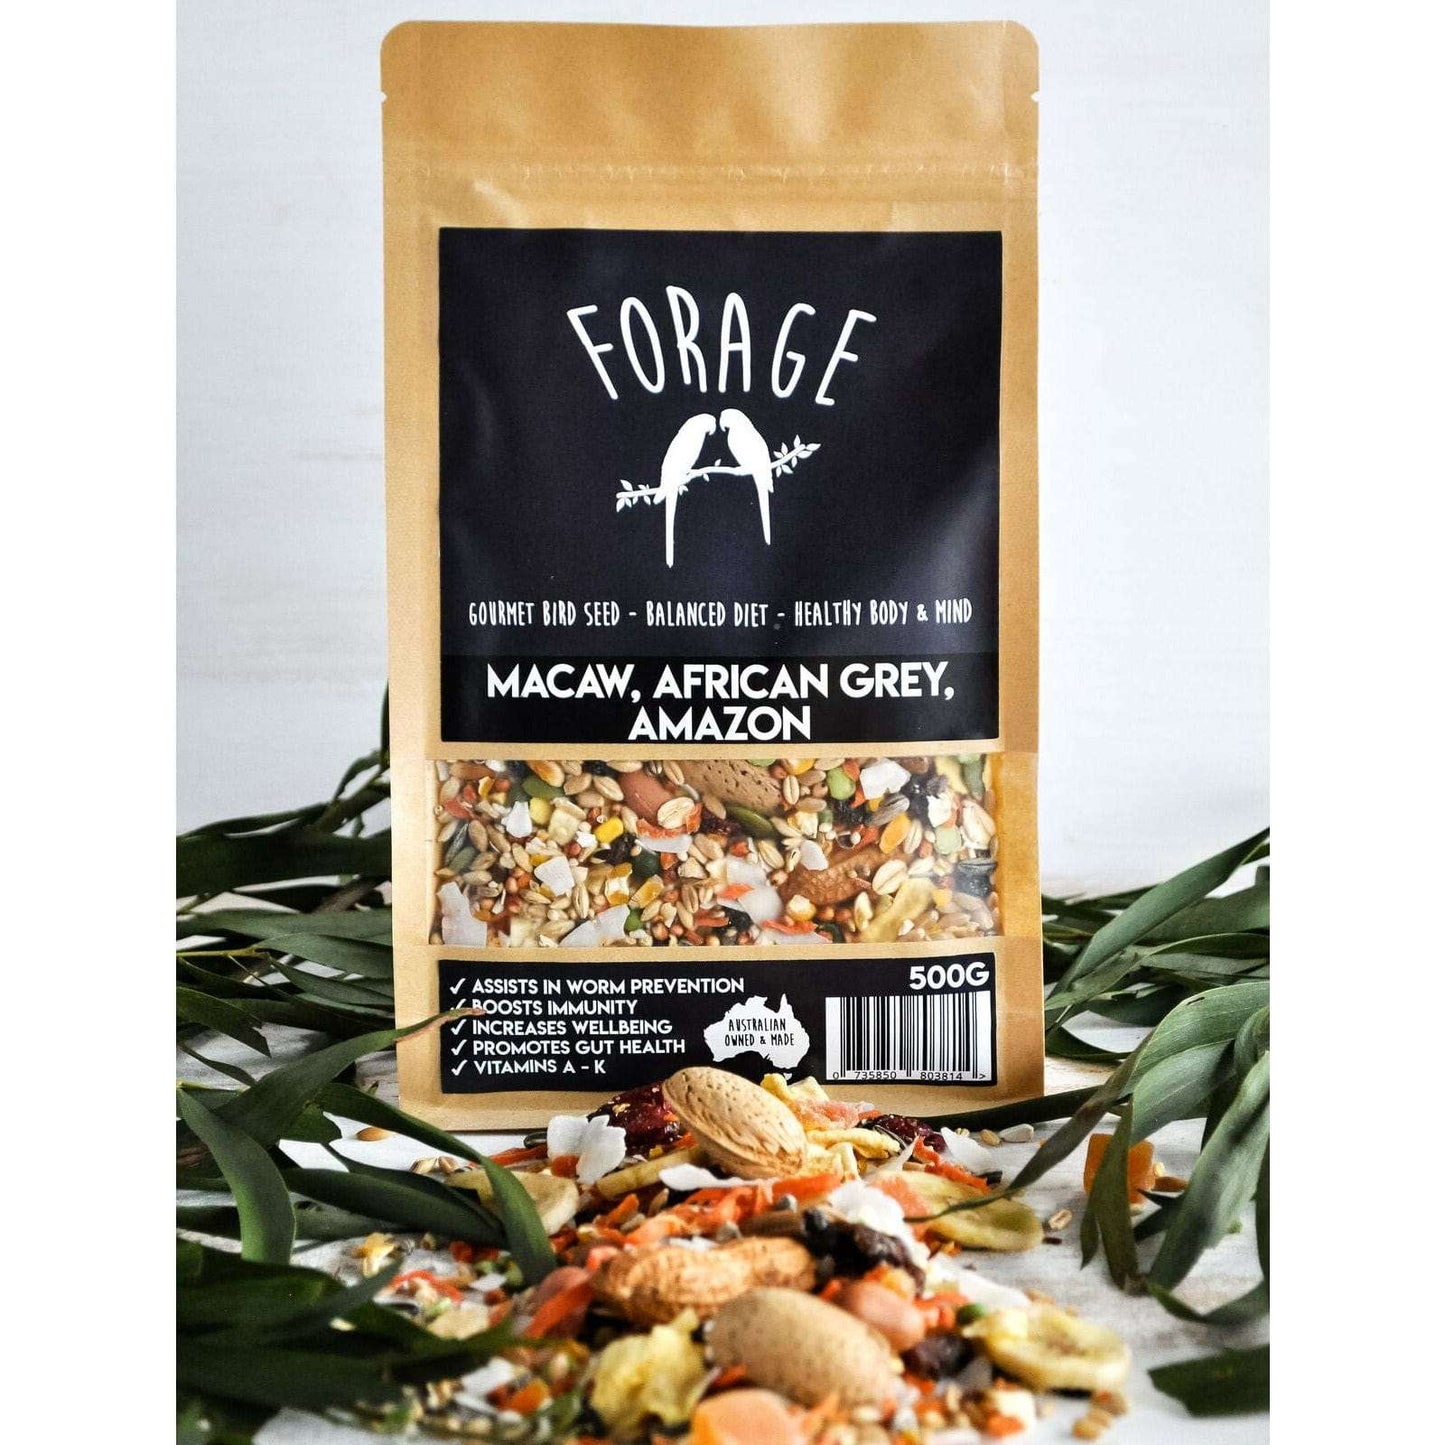 Forage Macaw, African Grey & Amazon Mix (Excl. TAS & WA) from Forage Gourmet Seed